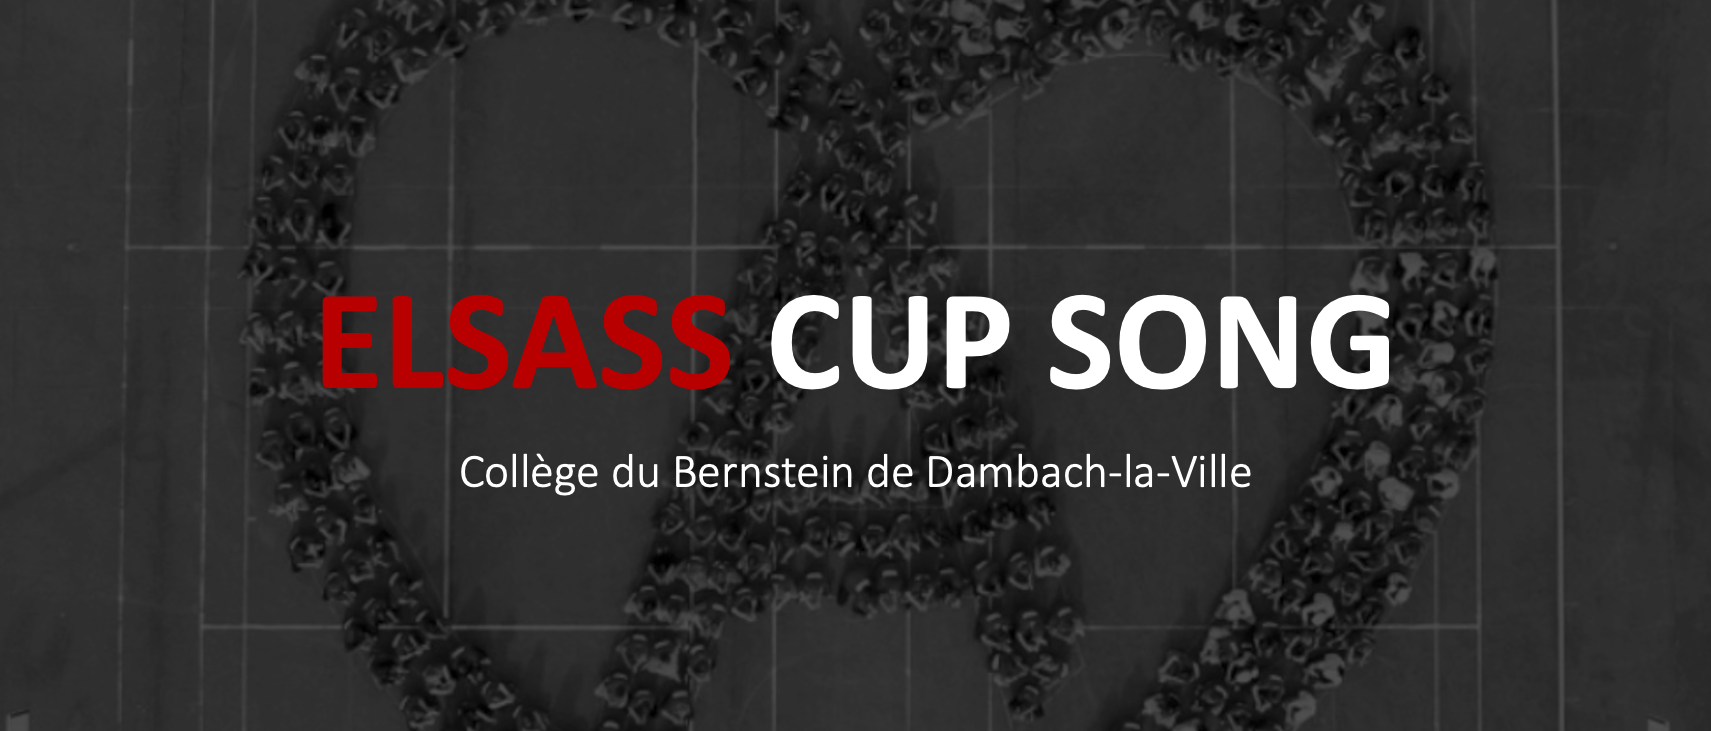 Elsass Cup Song